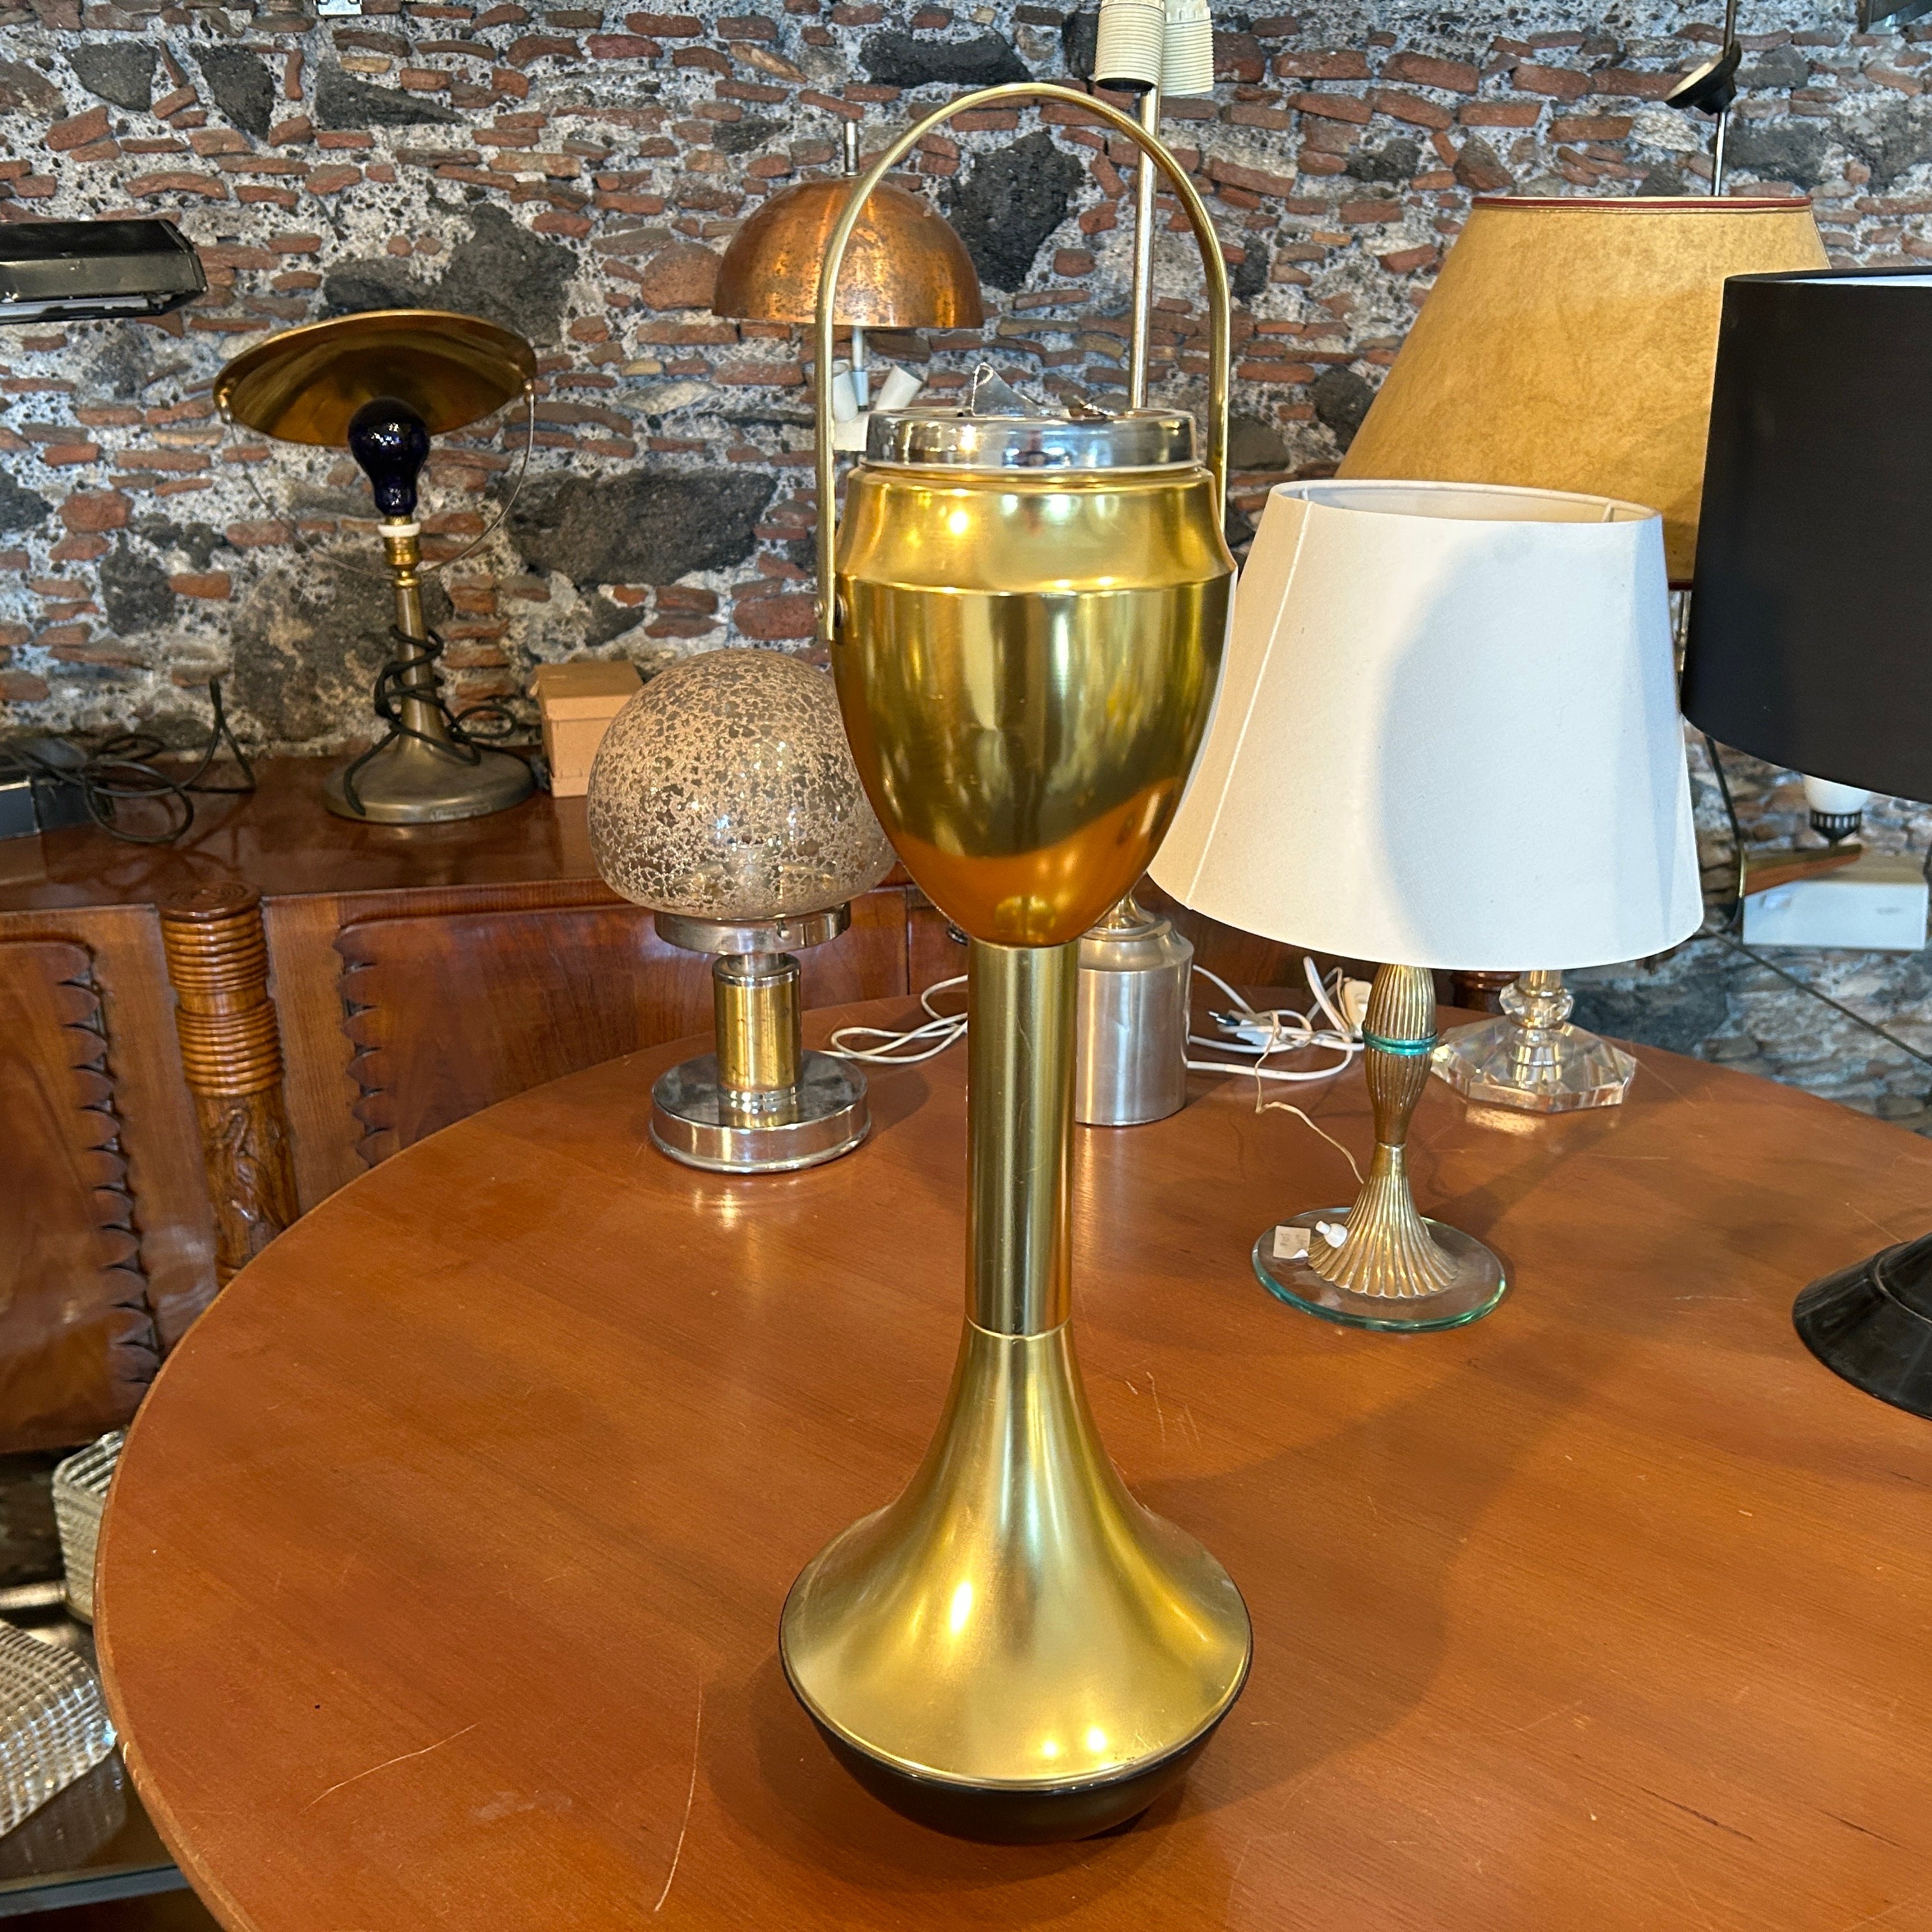 A functional column ashtray designed and manufactured in Italy in the Fifties by Rinnovel, in good condition overall with normal signs of use and age. The ashtray is crafted from lightweight gilded aluminum, a material that was popular in